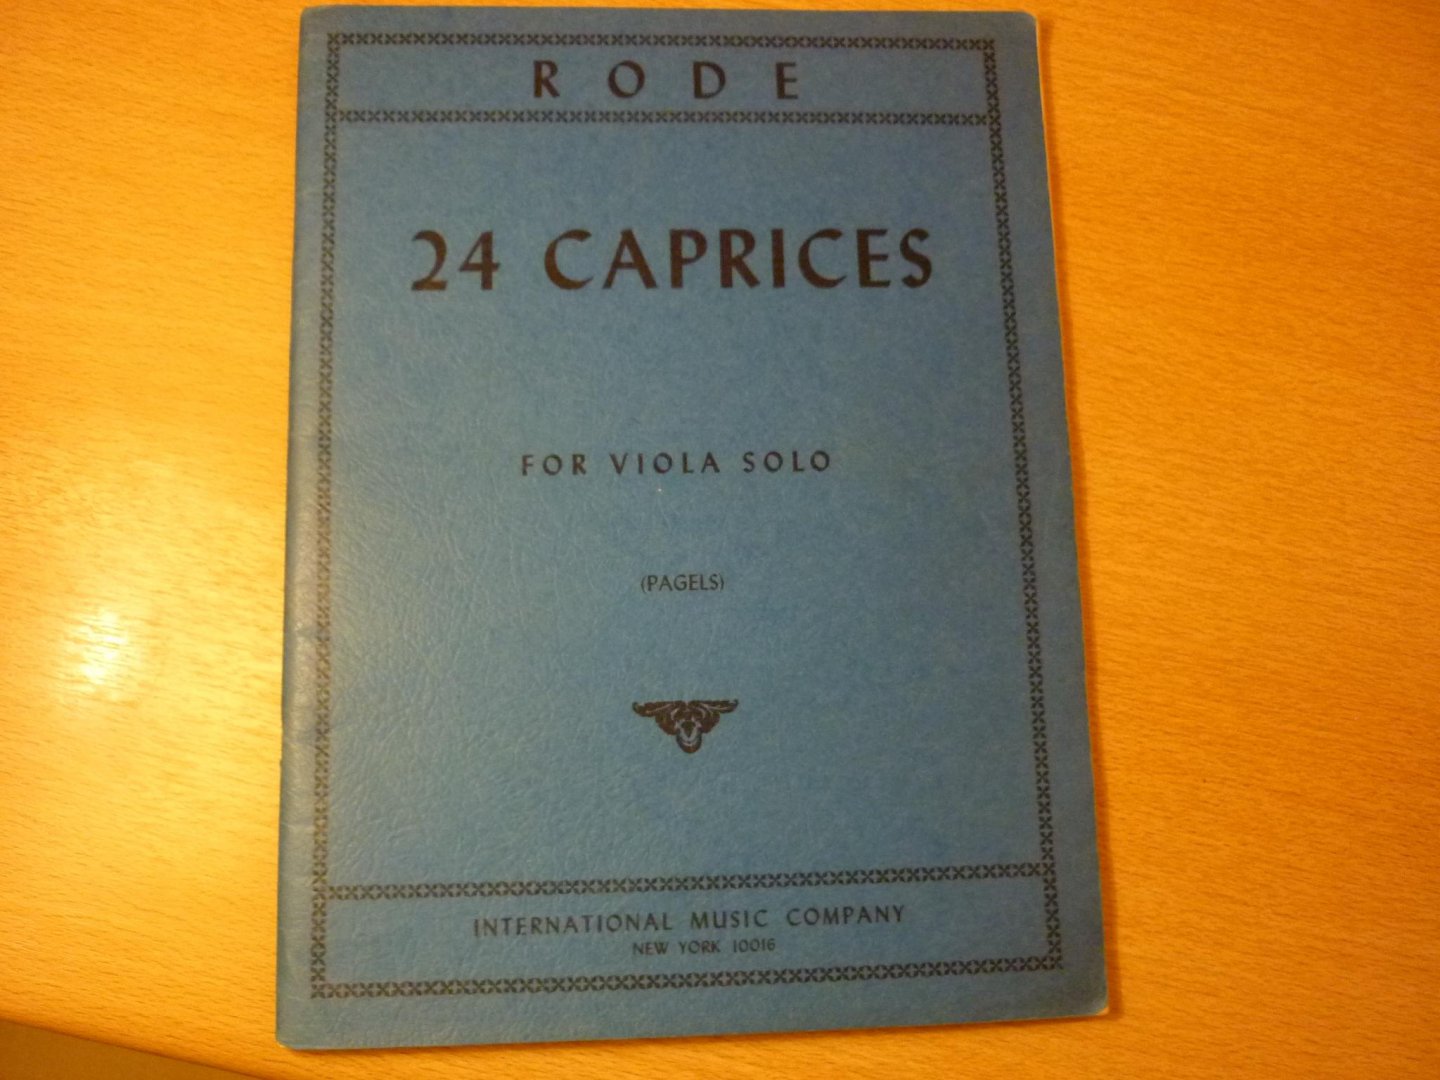 Rode; Pierre (1774 - 1830) - 24 Caprices; for viola solo (Pagels)